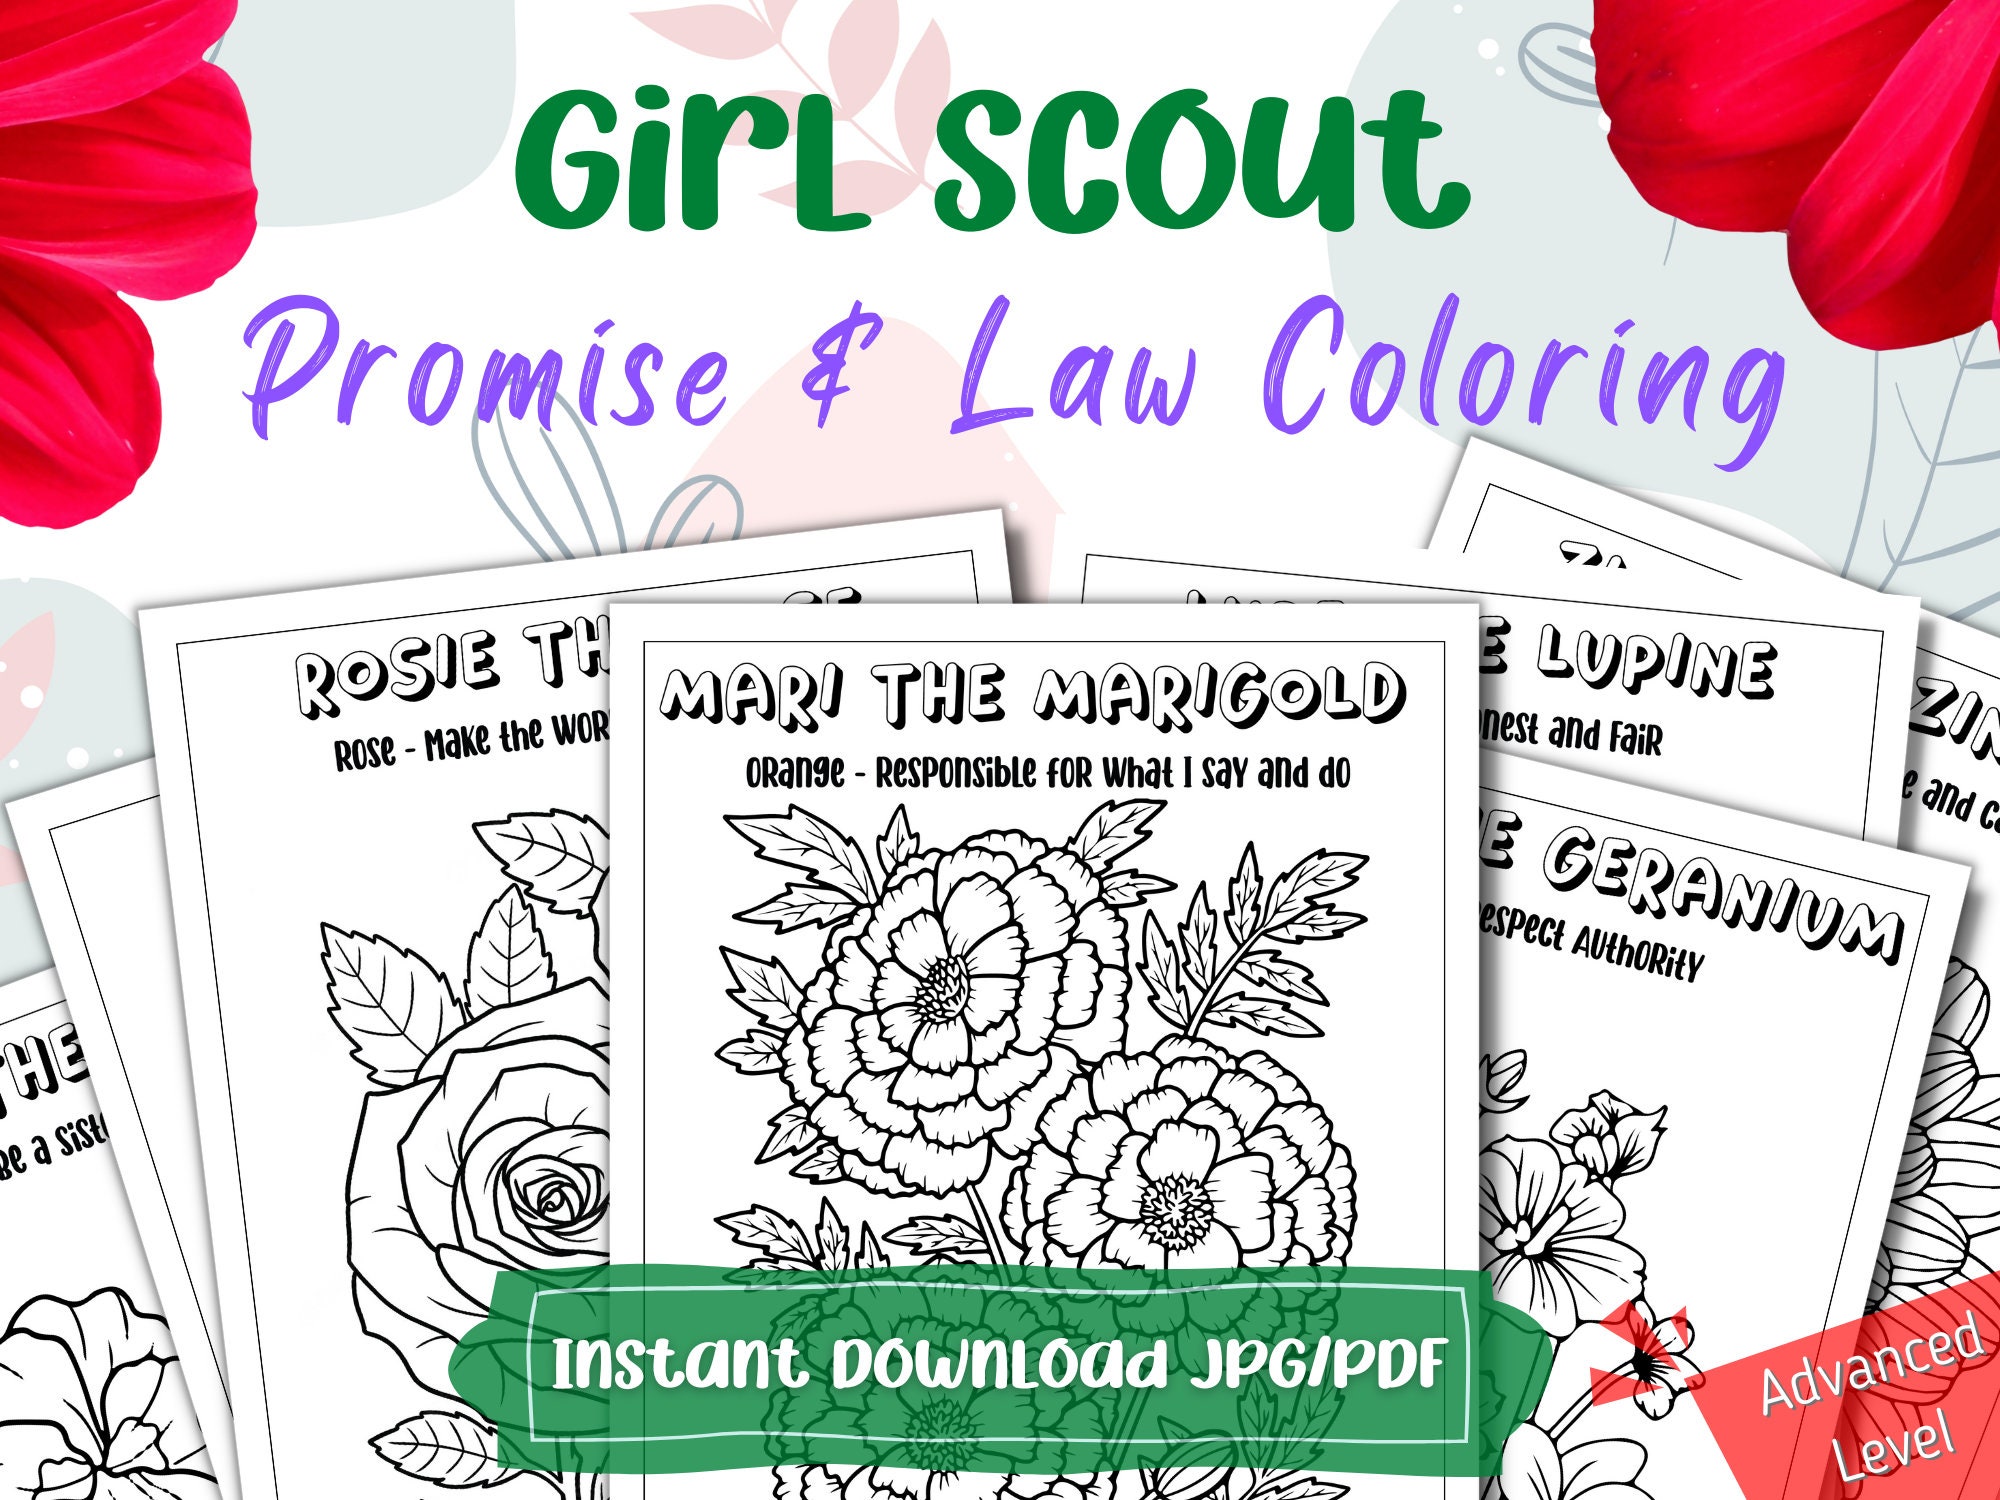 Girl Scout I'm a daisy Girl Scout, Song Lyric Poster, Letter Size, Digital  Download, Troop Leader, Troop Meeting, Handout, Activity